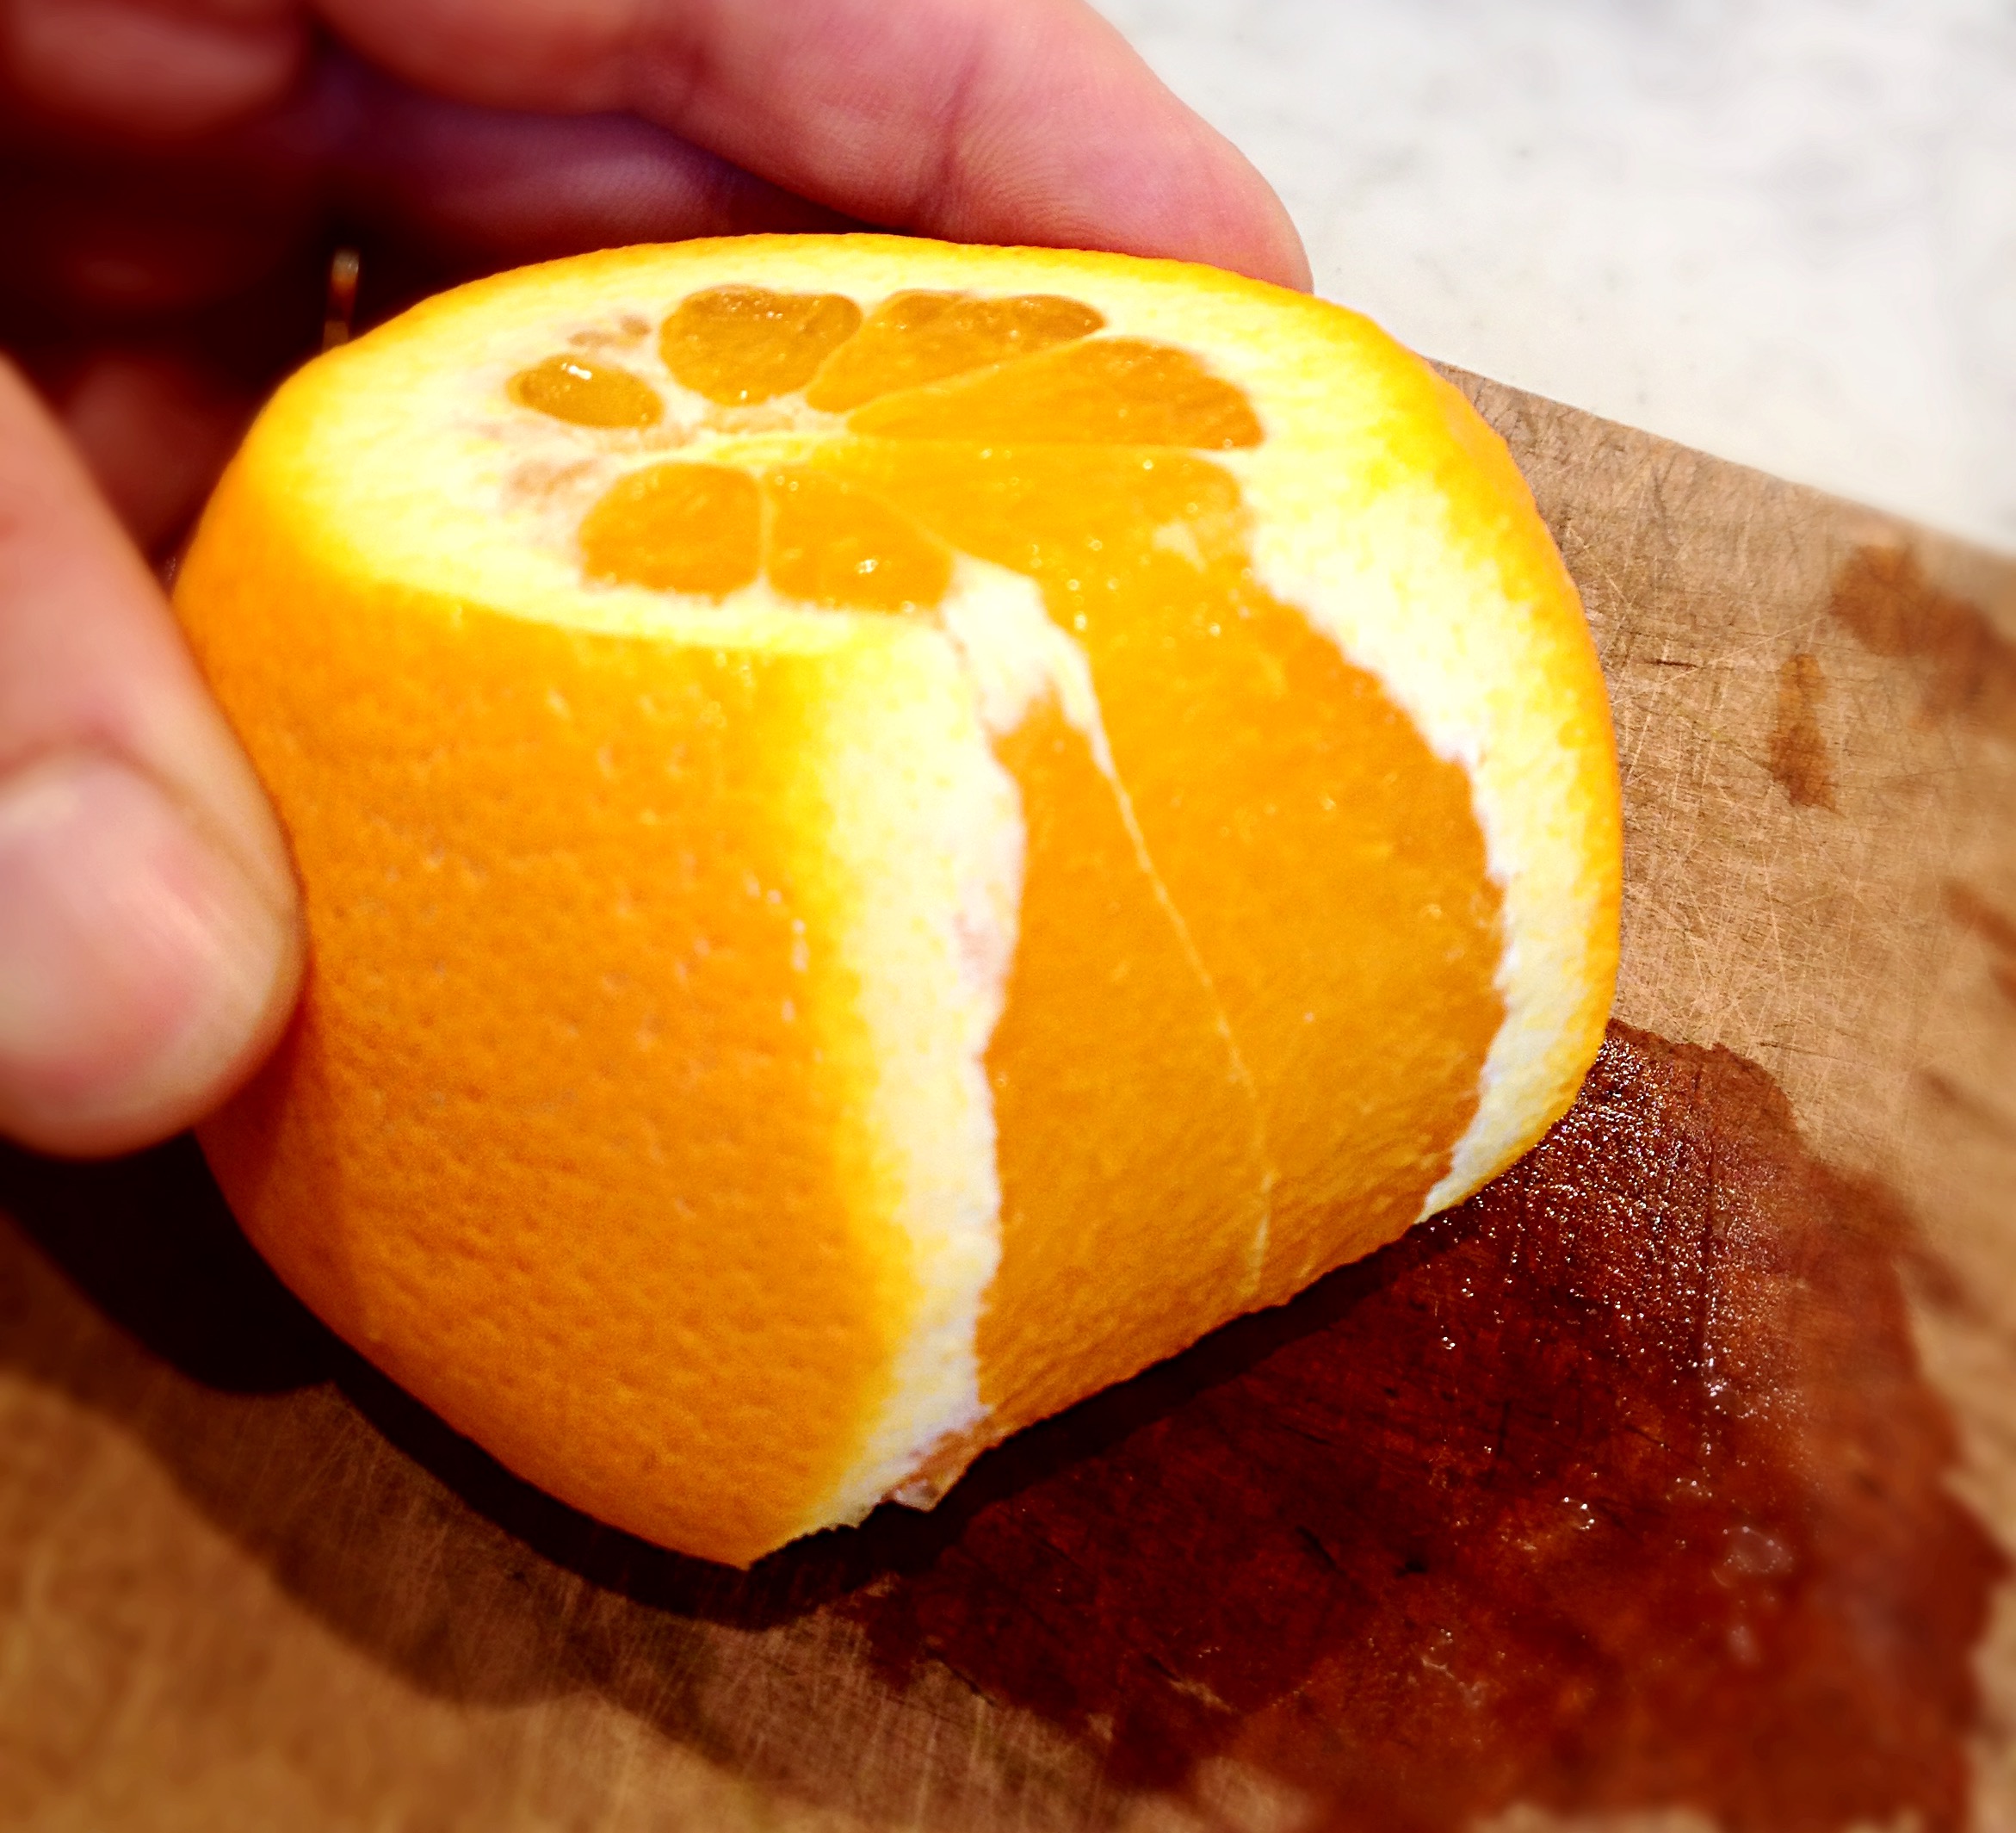 Trimming the peel and pith off the orange